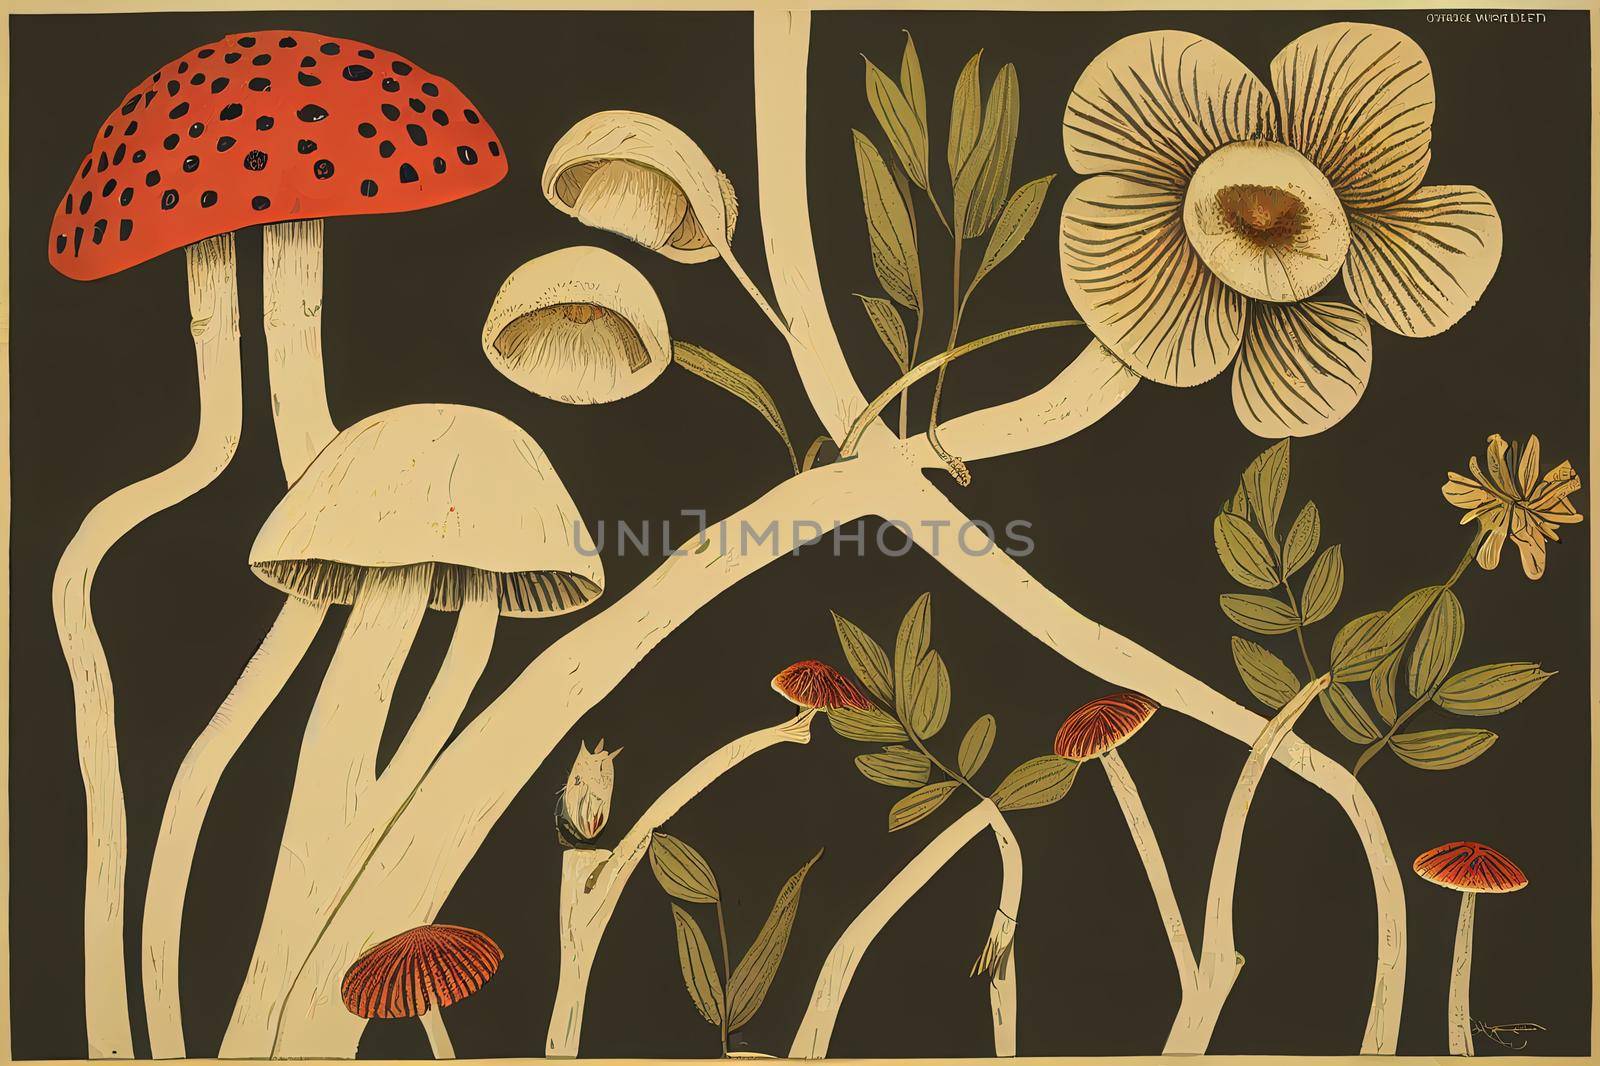 Cute Woodland Animals with Flowers, Plants, Mushrooms and Banner.